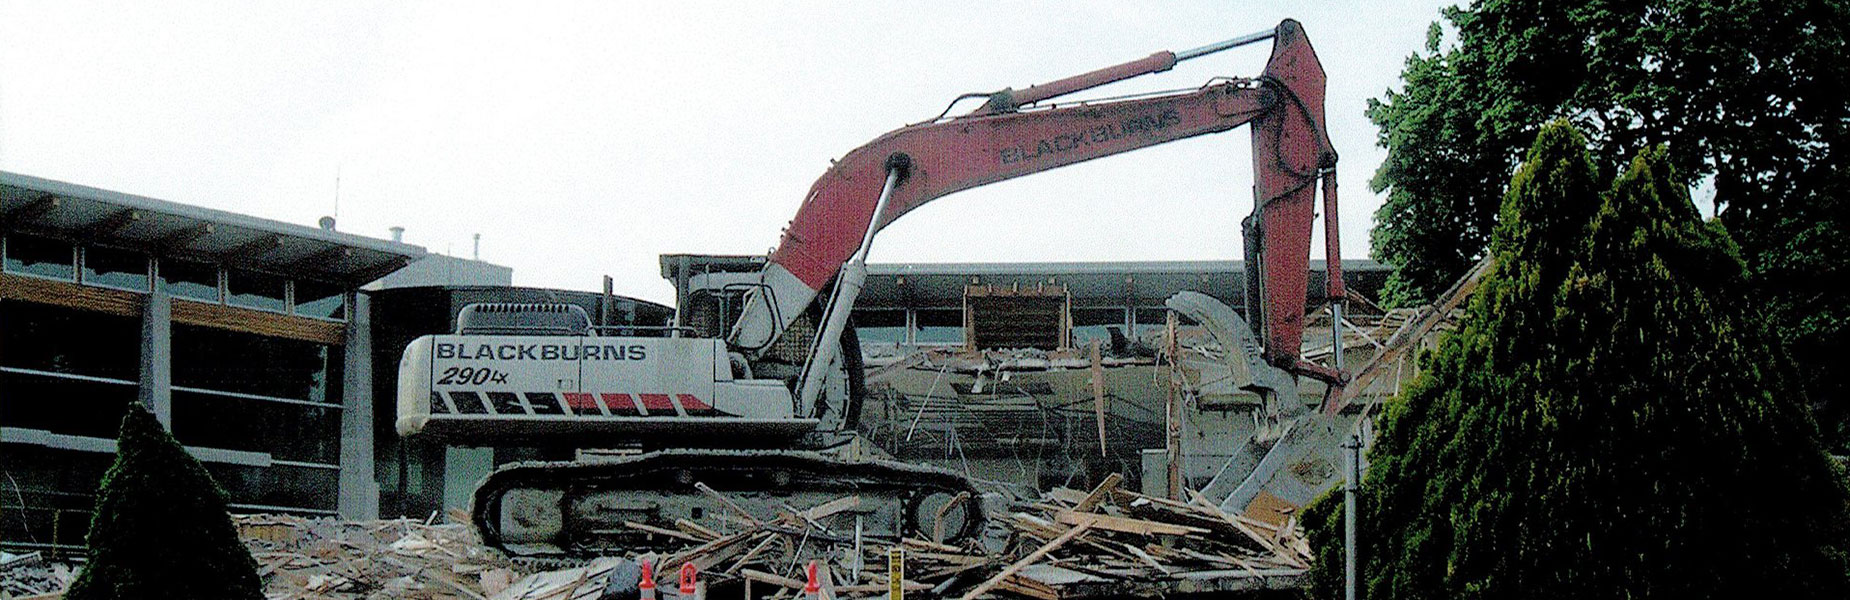 Blackburn Excavating Ltd offers high demolition services, as well as complementary surveying services through our sister company, Blackburn Surveying Ltd.